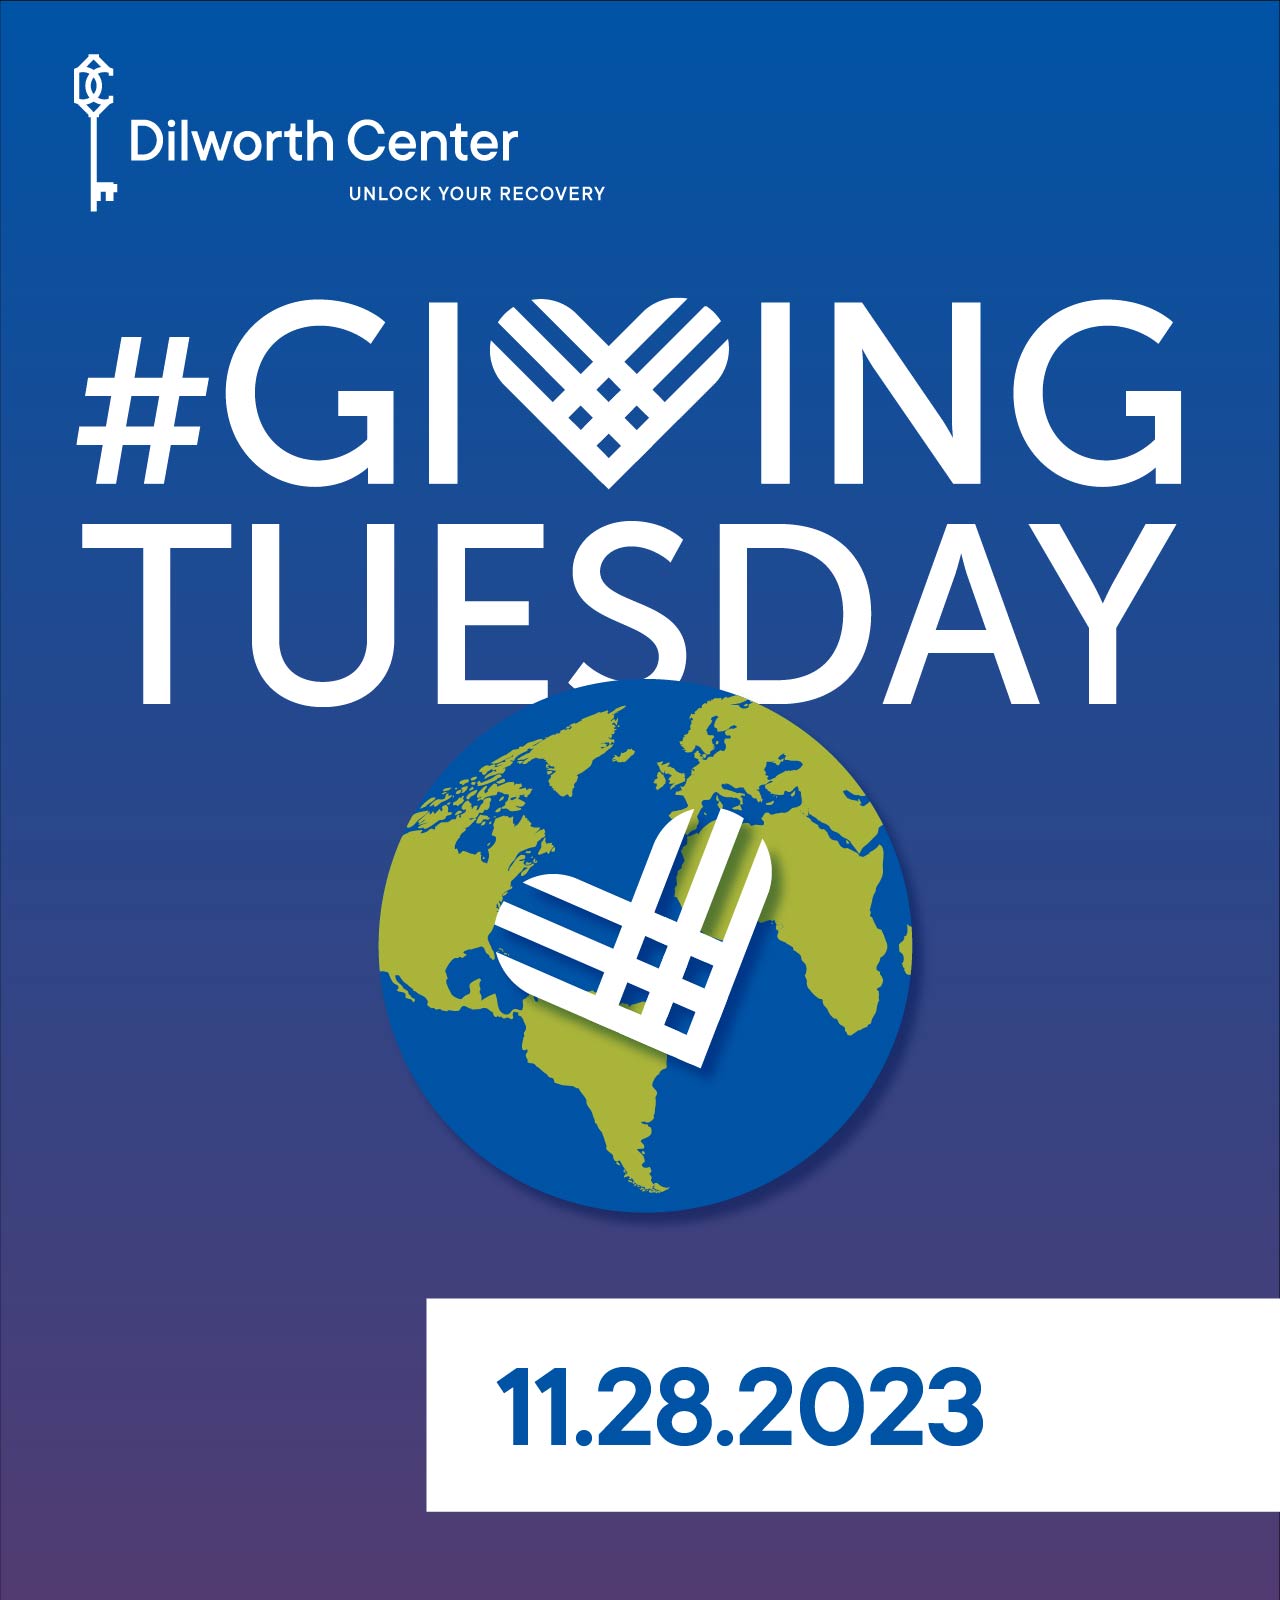 Click here to give for giving Tuesday